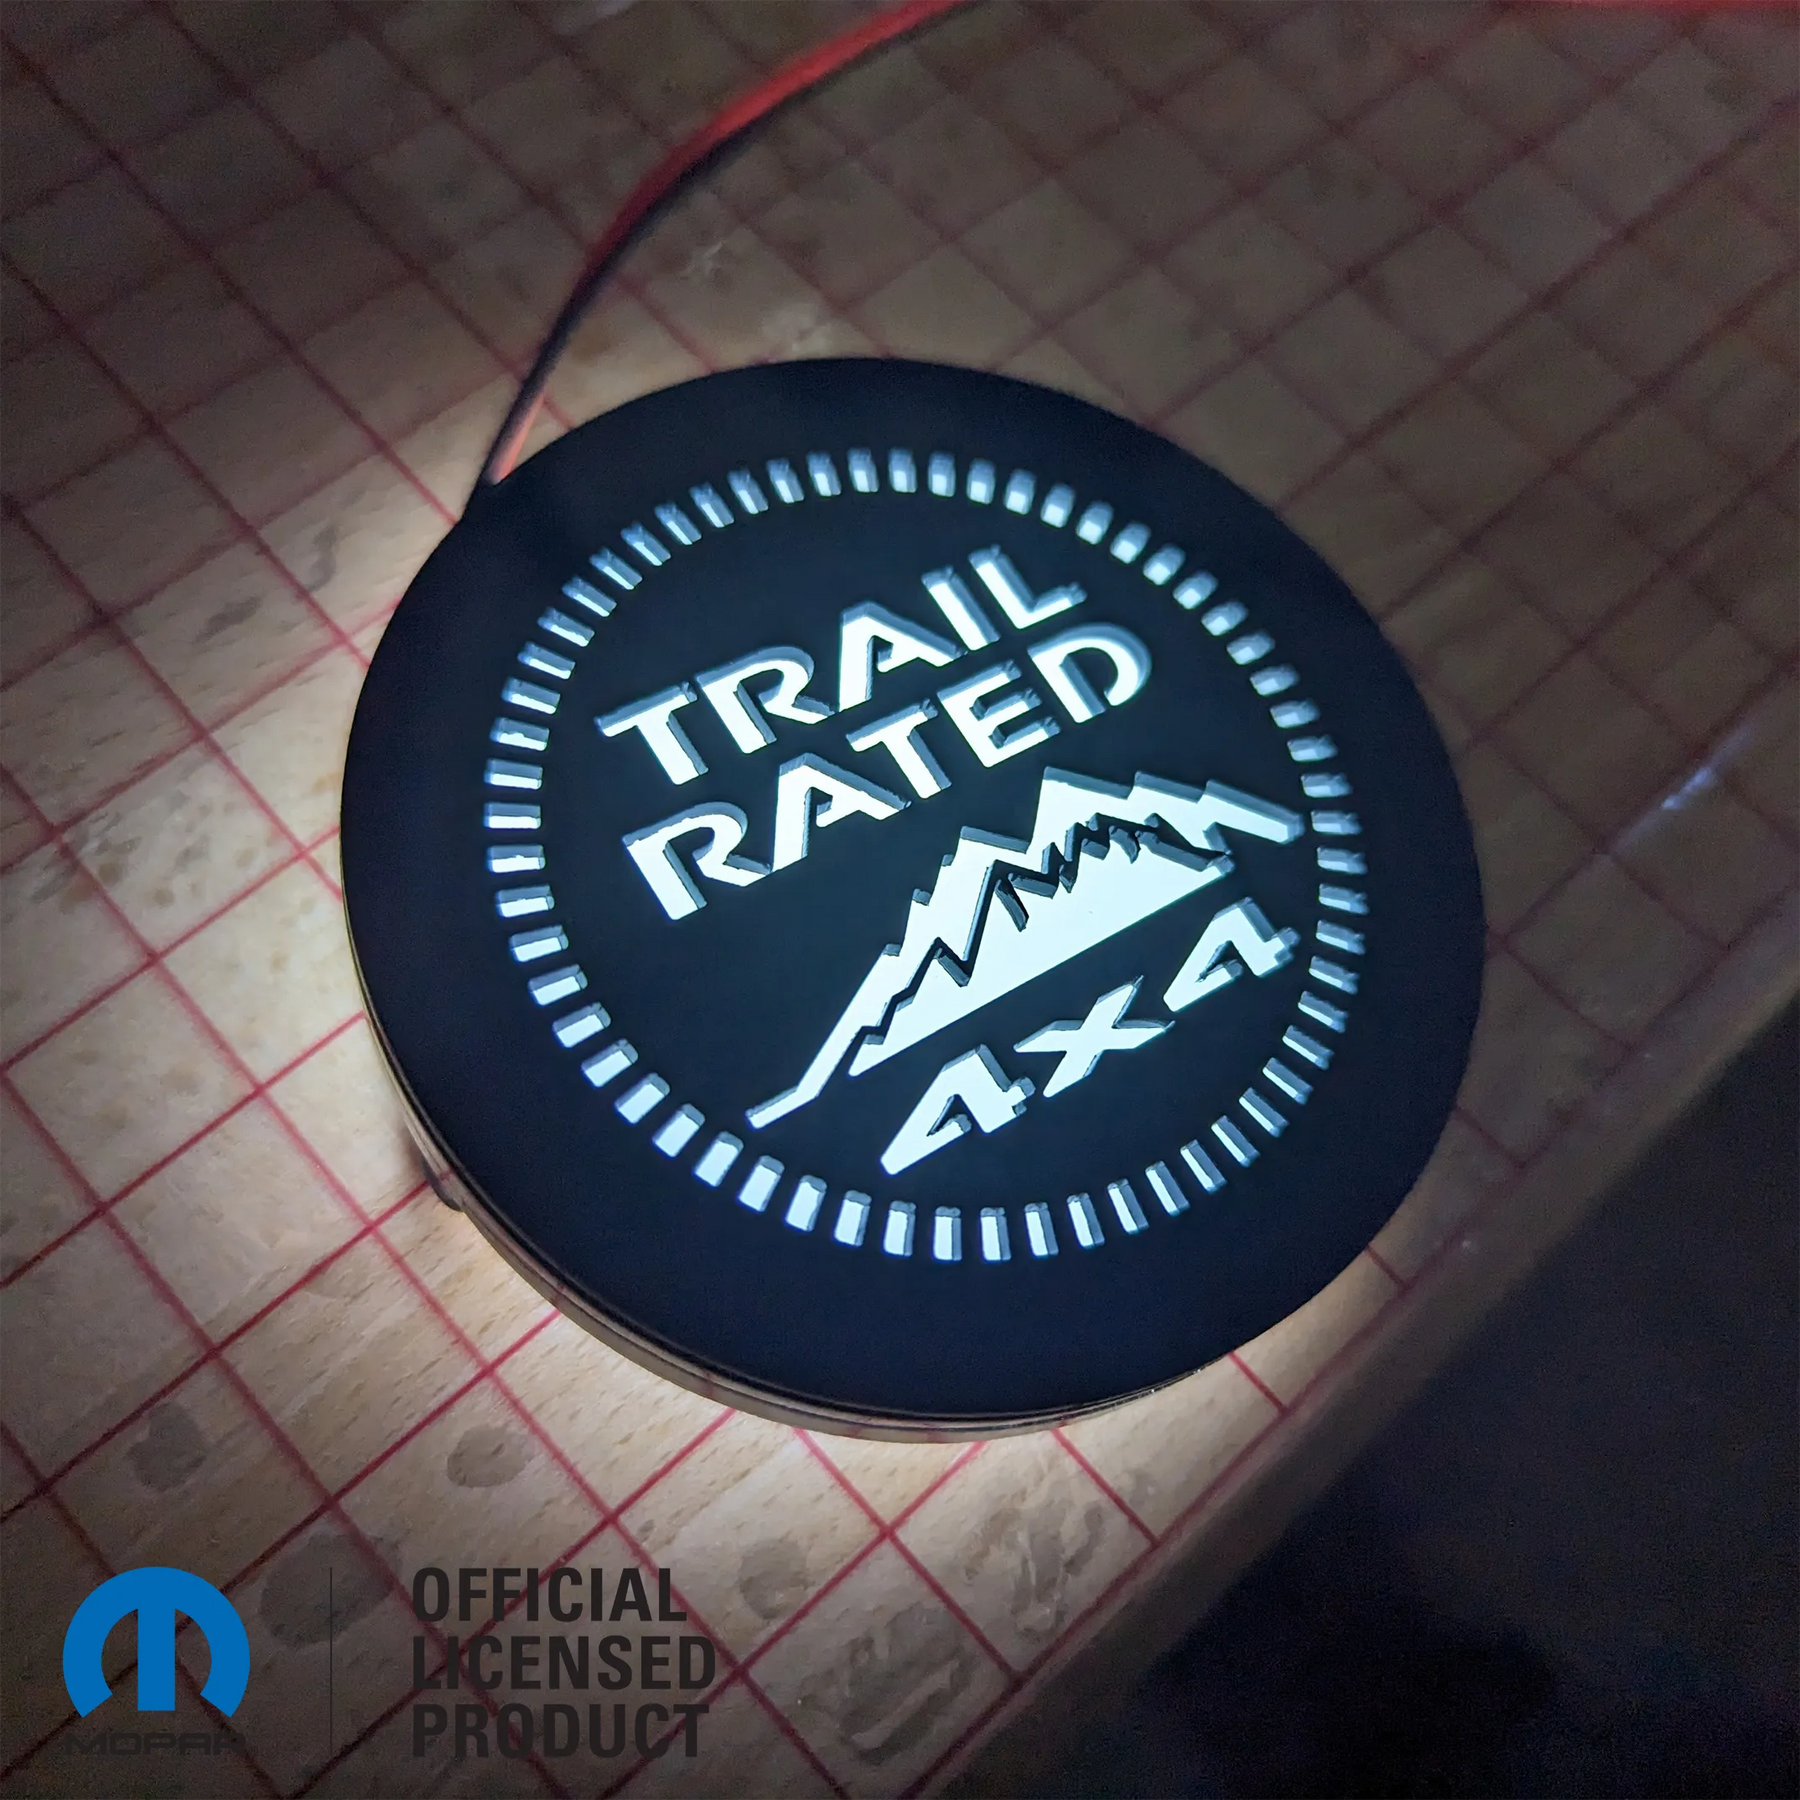 LED Jeep® Trail Rated 4x4 Badge - Officially Licensed Product - Black and White